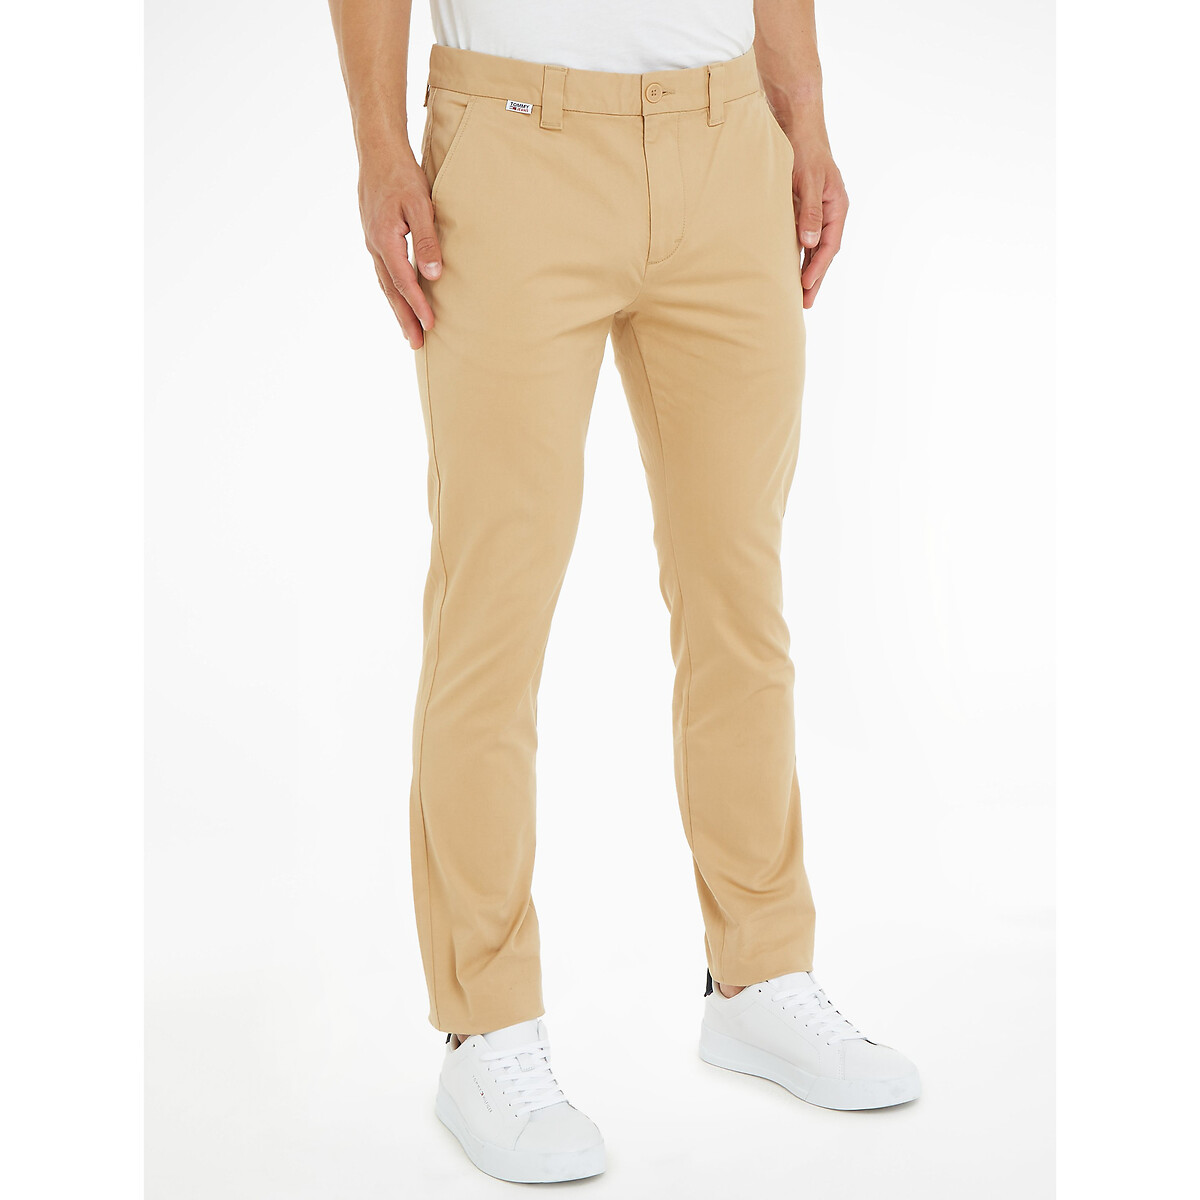 Image of Austin Cotton Chinos in Slim Fit